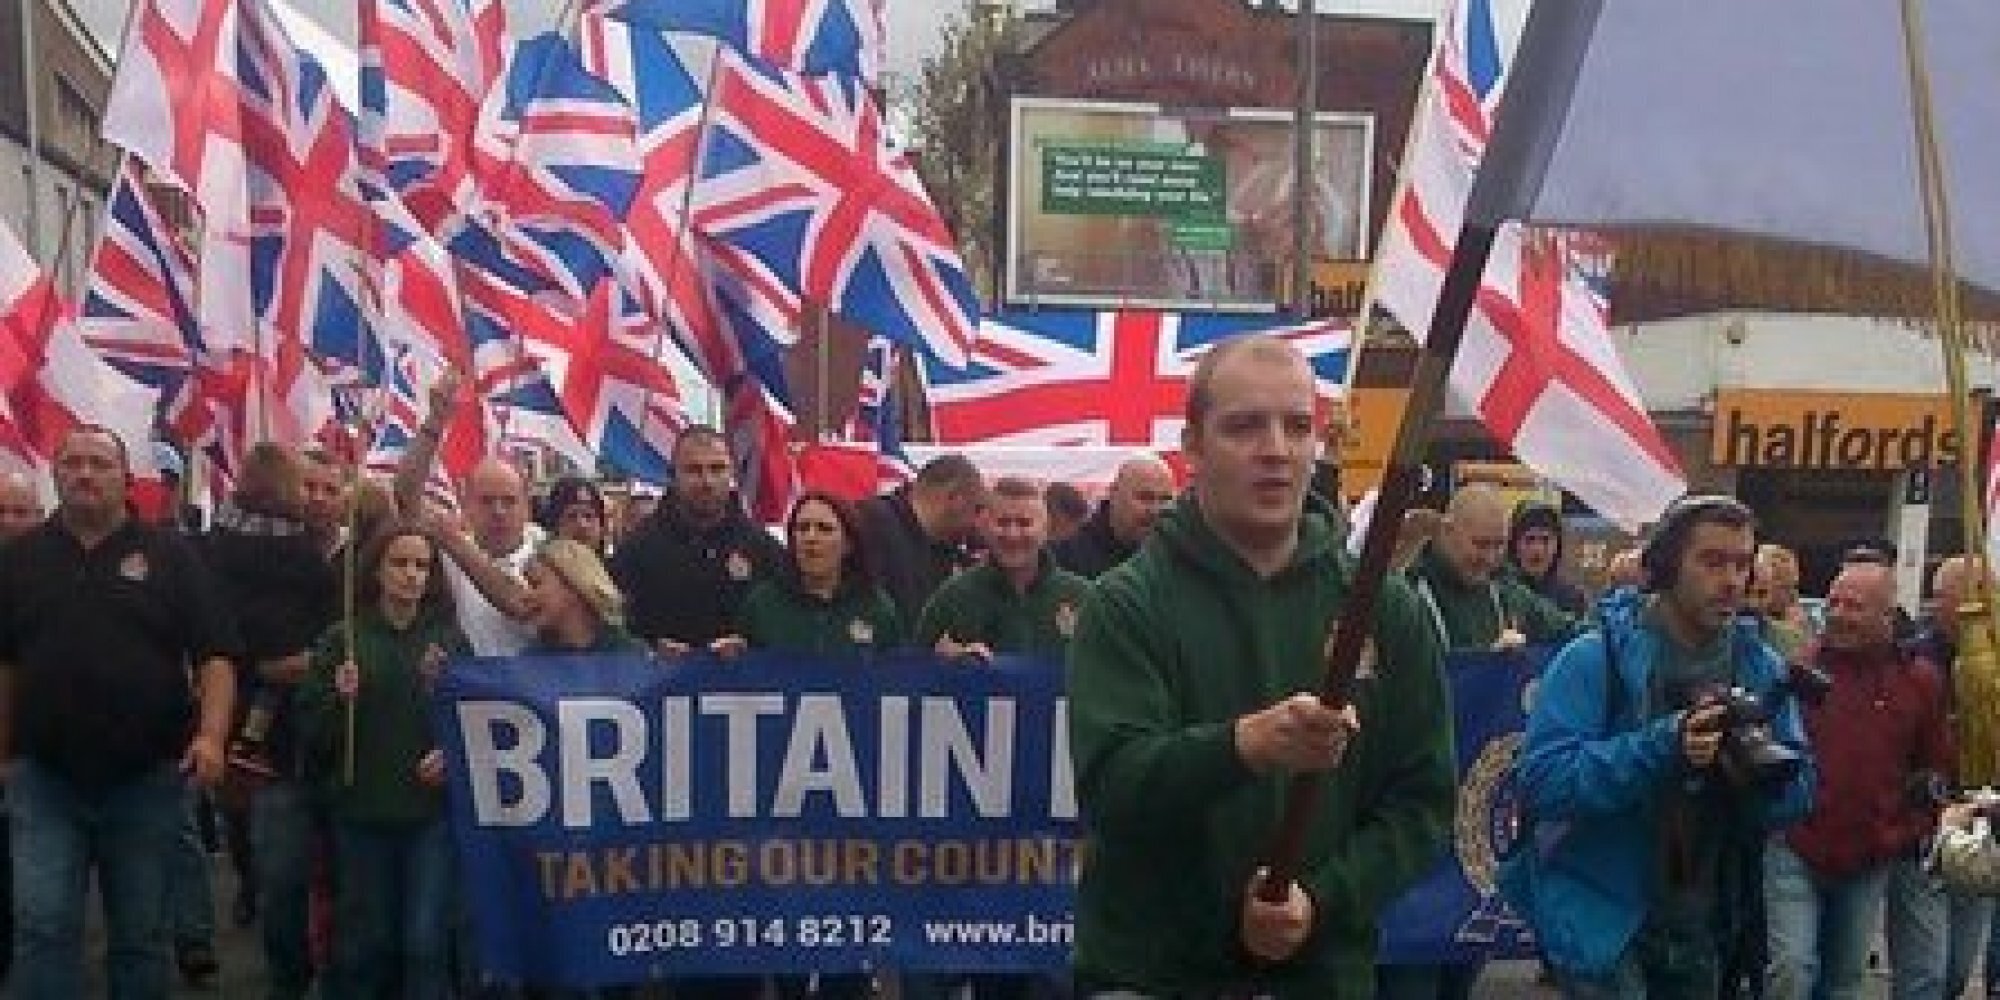 Britain First Protest Against Rotherham Abuse By Trying To Flog Their Merchandise HuffPost UK News photo picture